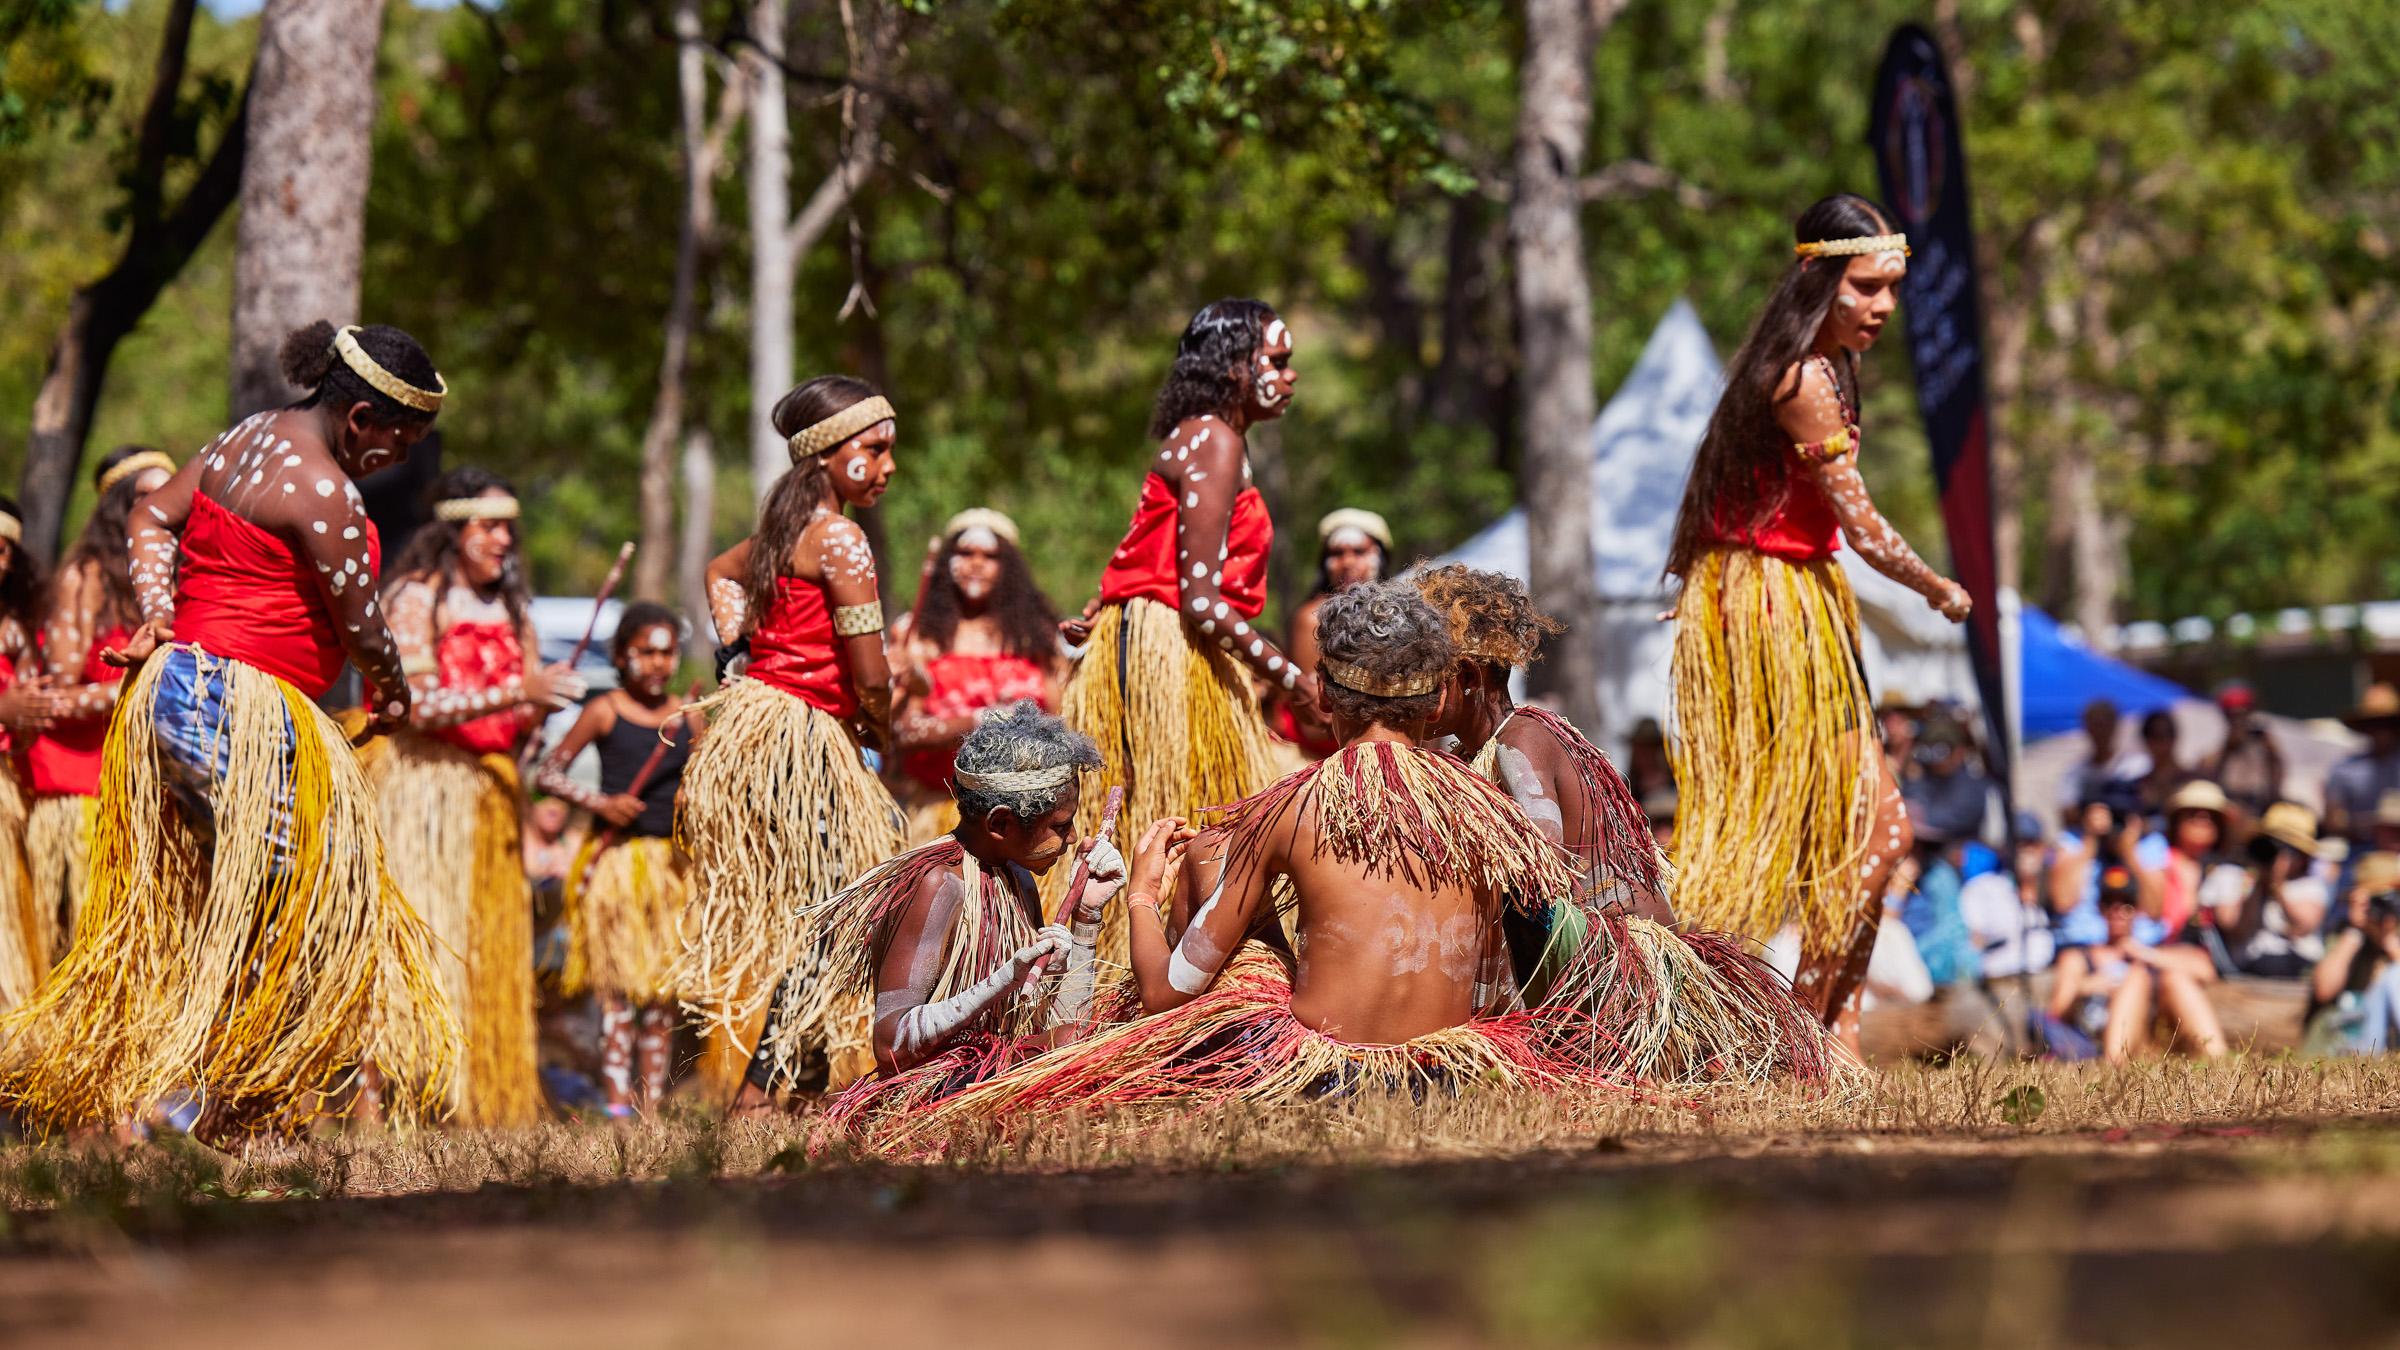 A group of First Nations performers dancing in front of a crowd at the Laura Quinkan Dance Festival